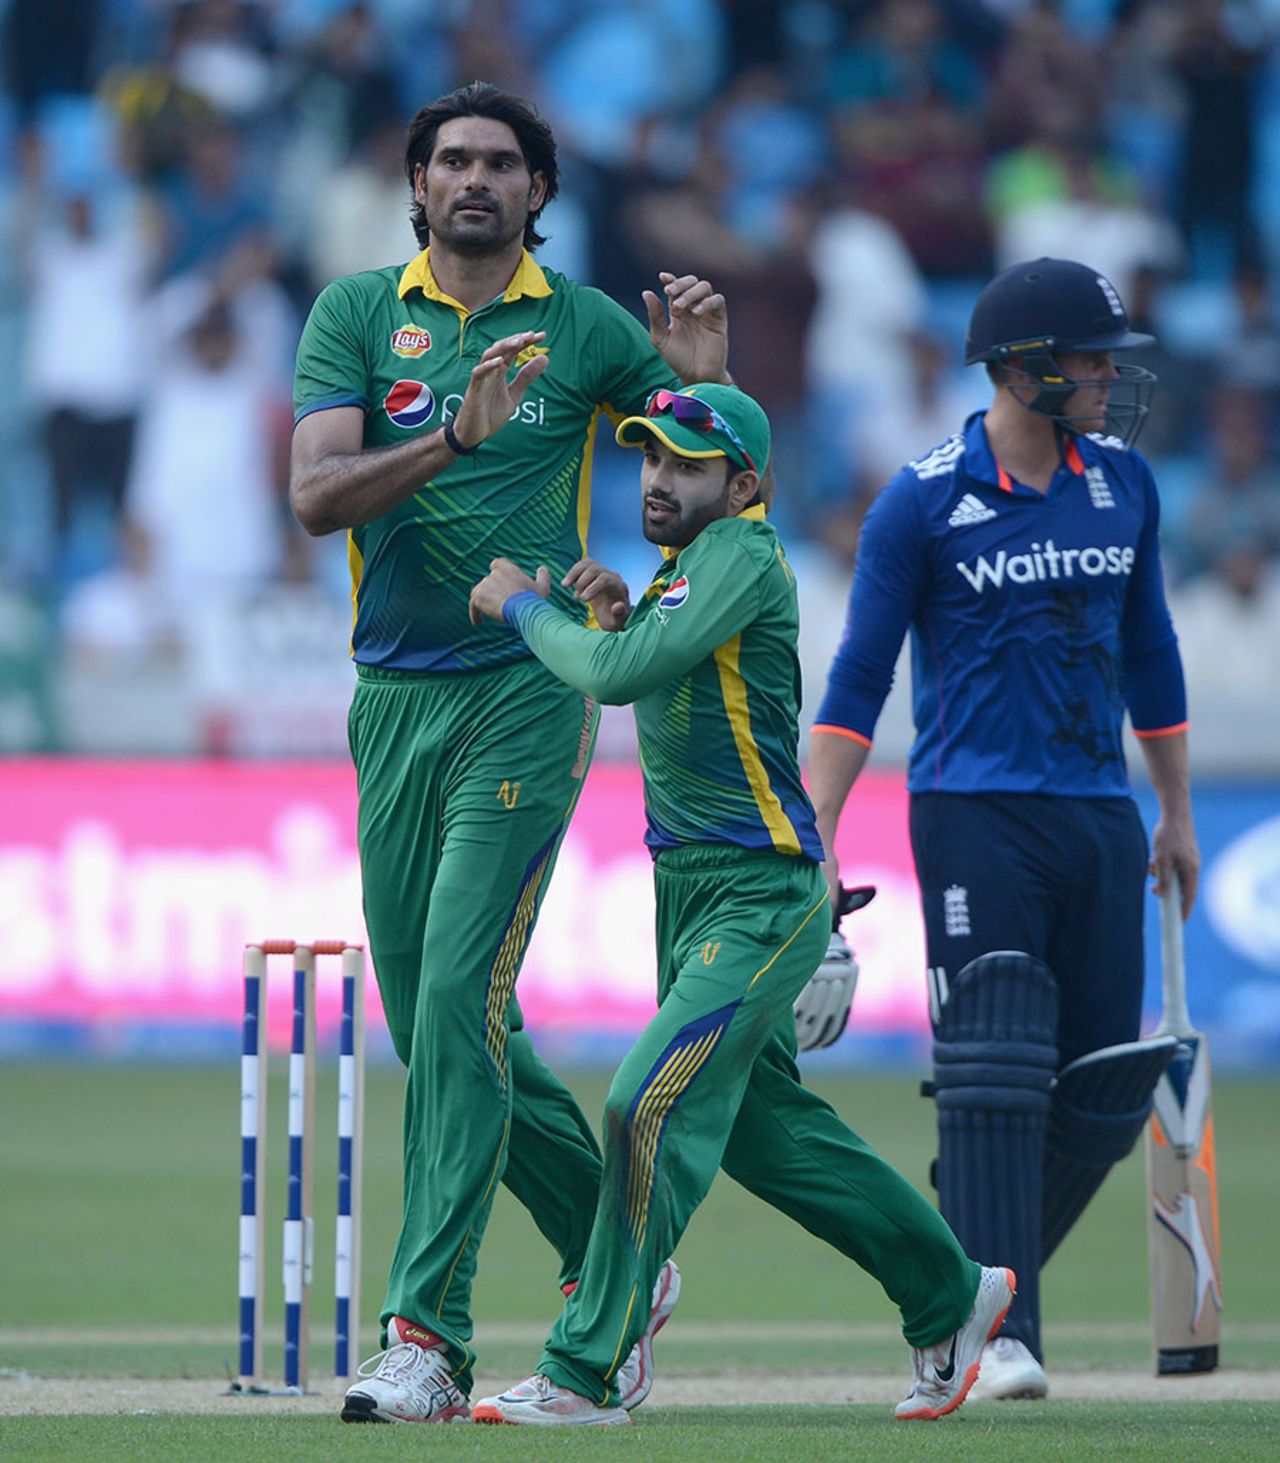 Mohammad Irfan dismissed Alex Hales for 22 to end a 54-run stand, Pakistan v England, 4th ODI, Dubai, November 20, 2015